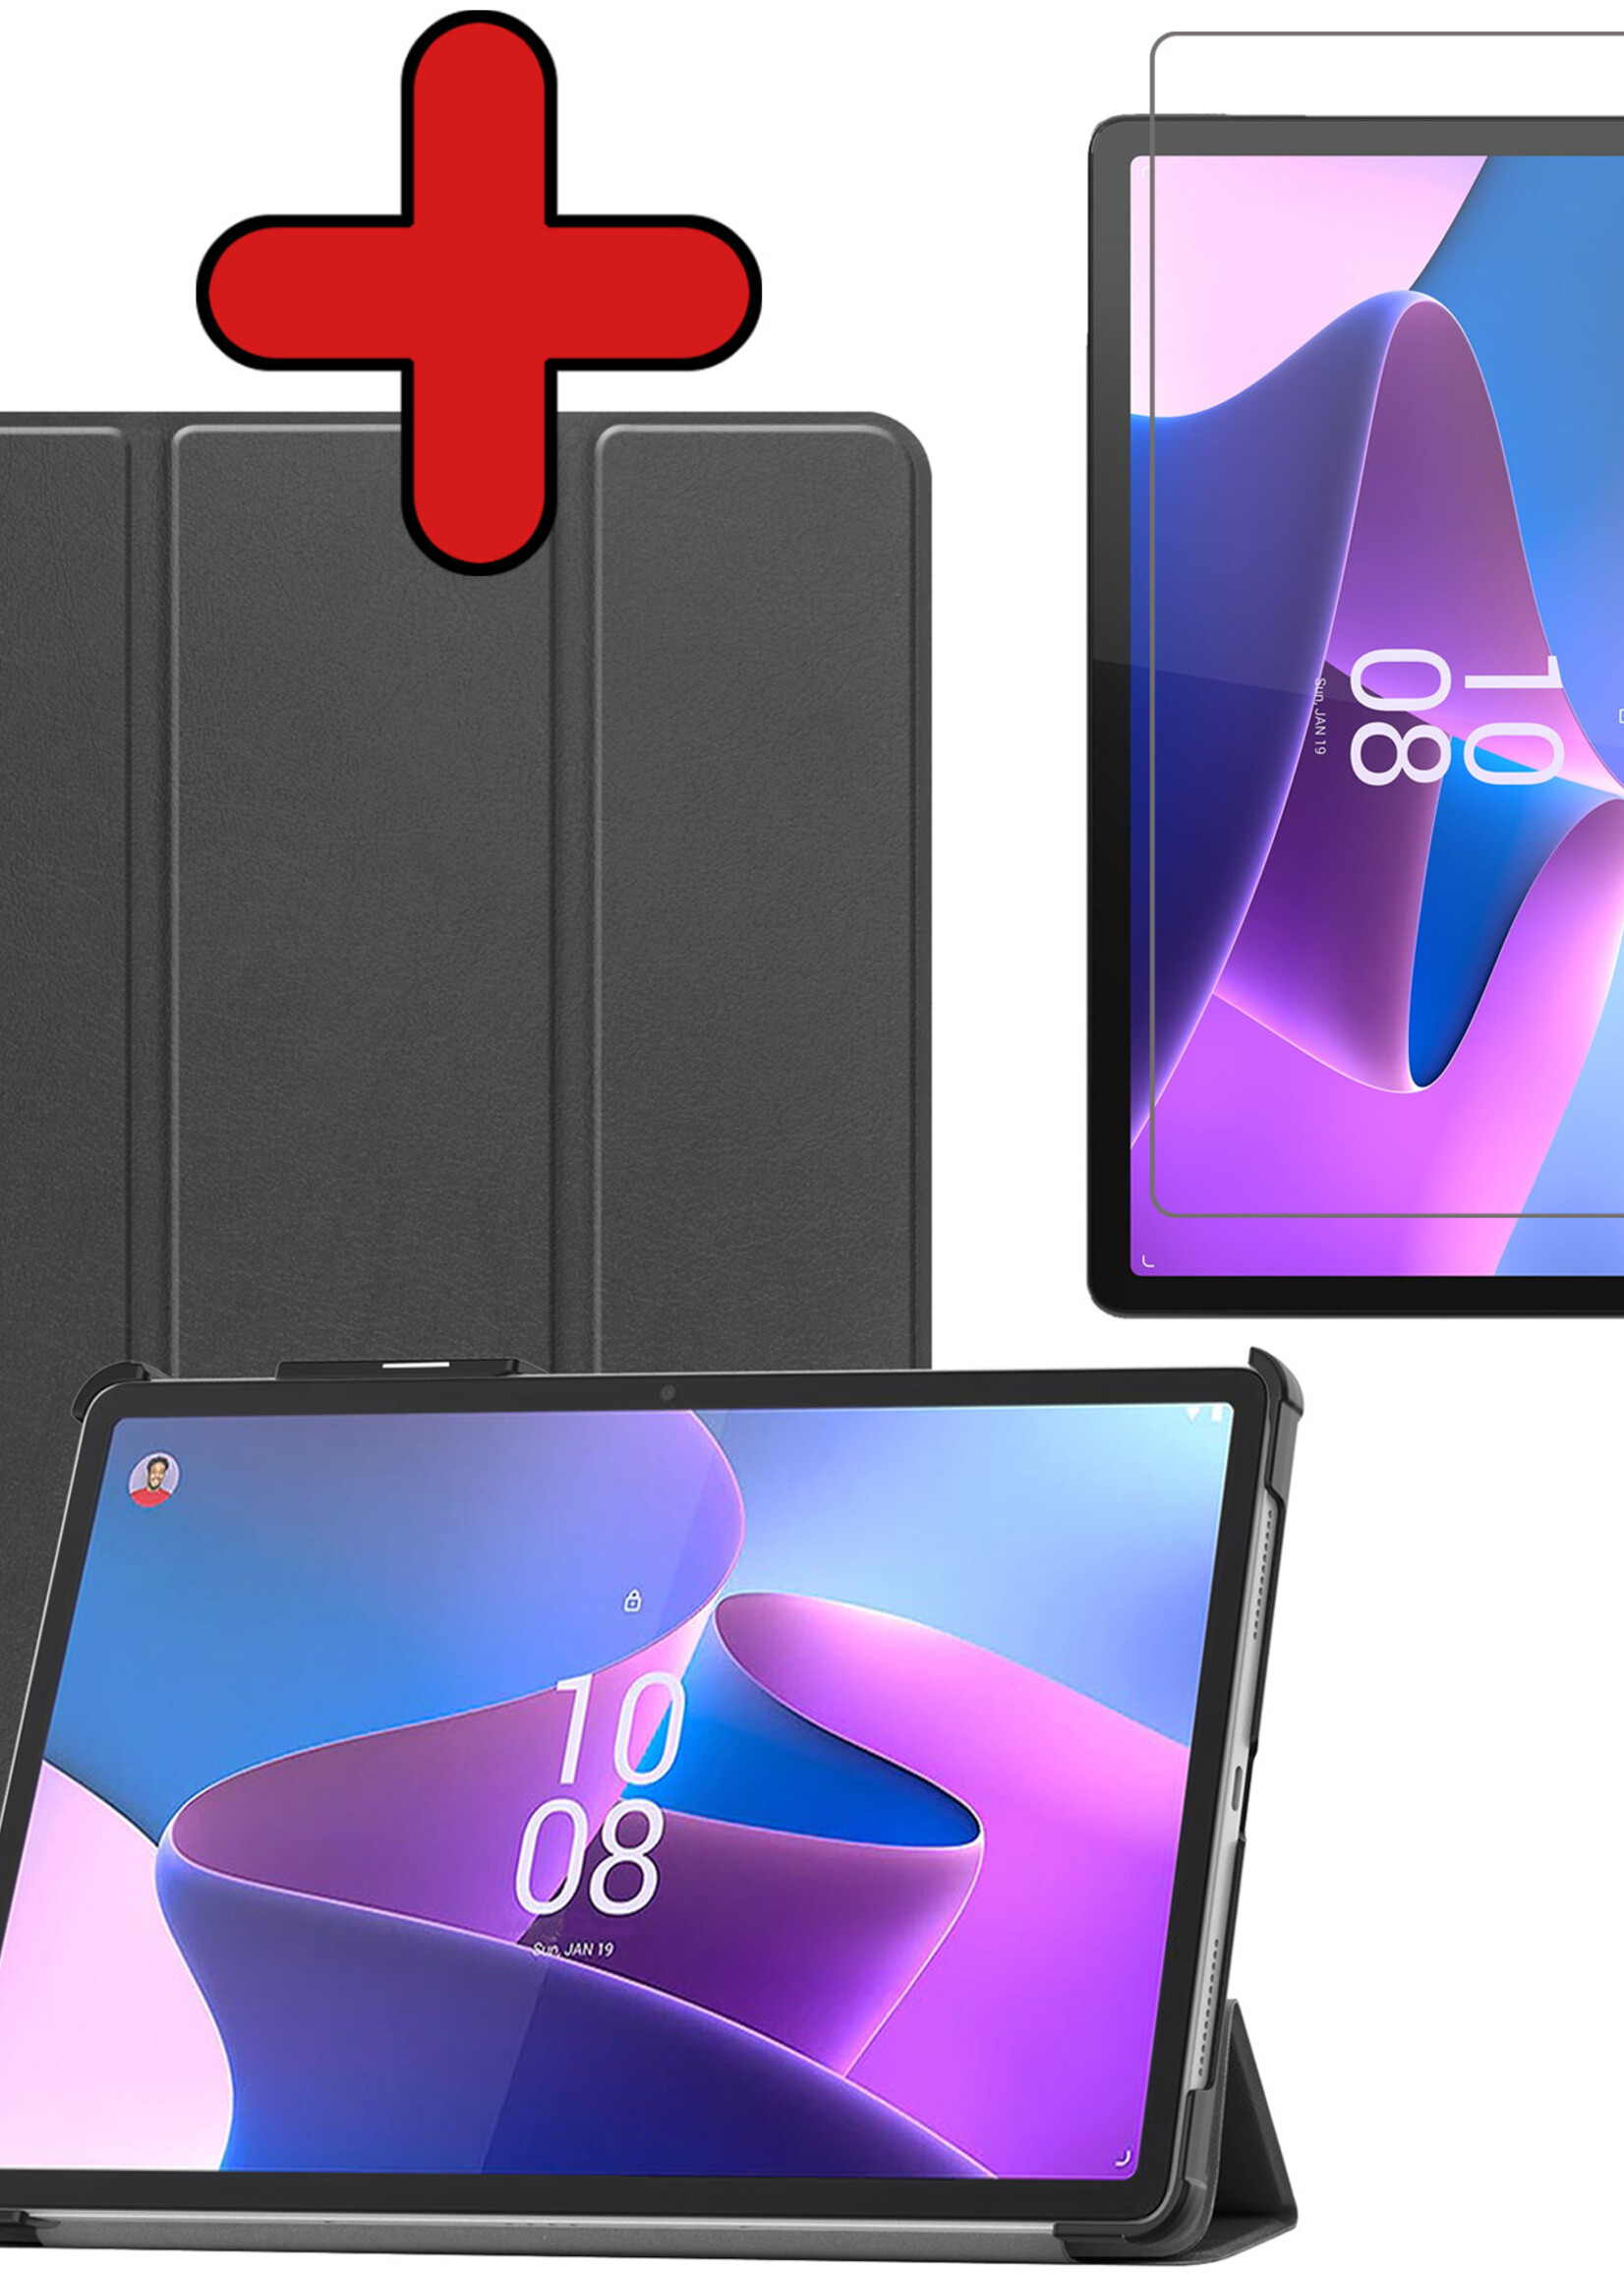 BTH Hoes Geschikt voor Lenovo Tab P11 Pro Hoes Book Case Hoesje Trifold Cover Met Uitsparing Geschikt voor Lenovo Pen Met Screenprotector - Hoesje Geschikt voor Lenovo Tab P11 Pro Hoesje Bookcase - Zwart